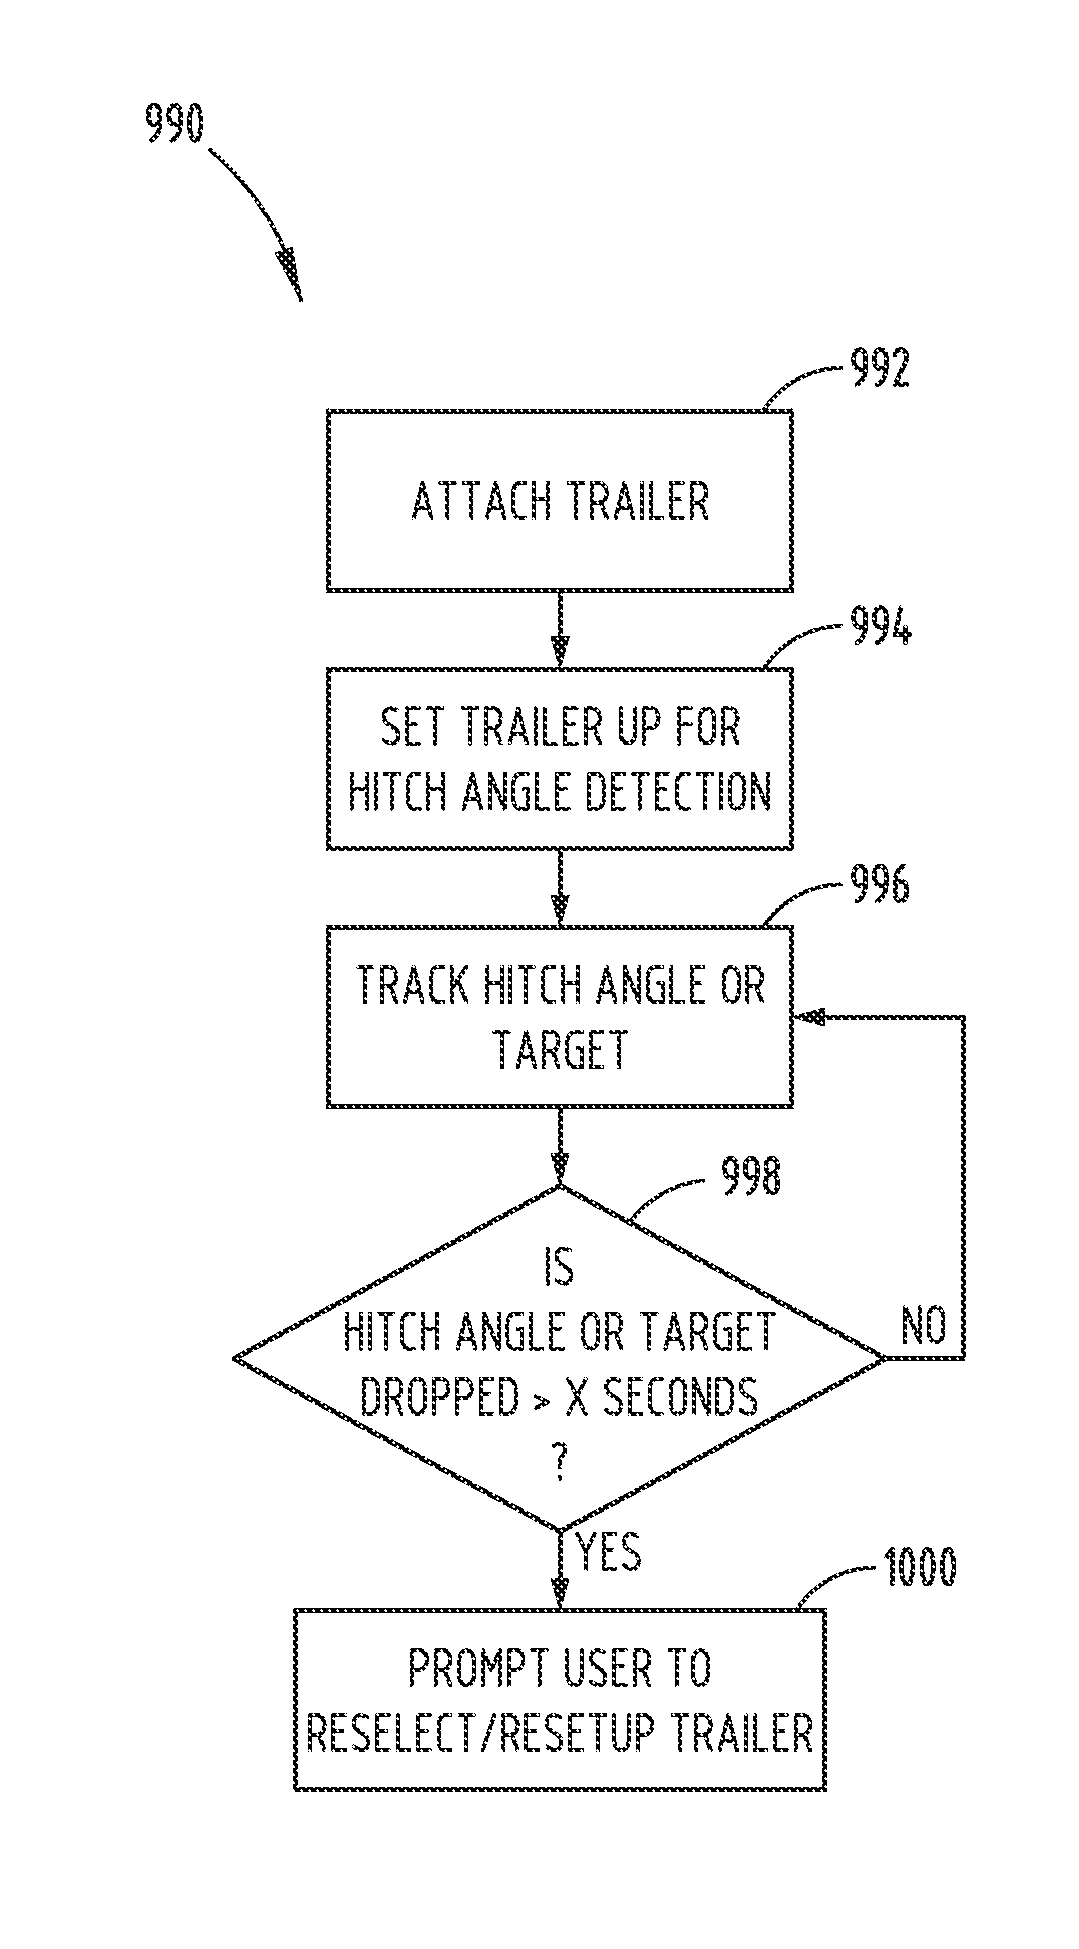 Trailer monitoring system and method